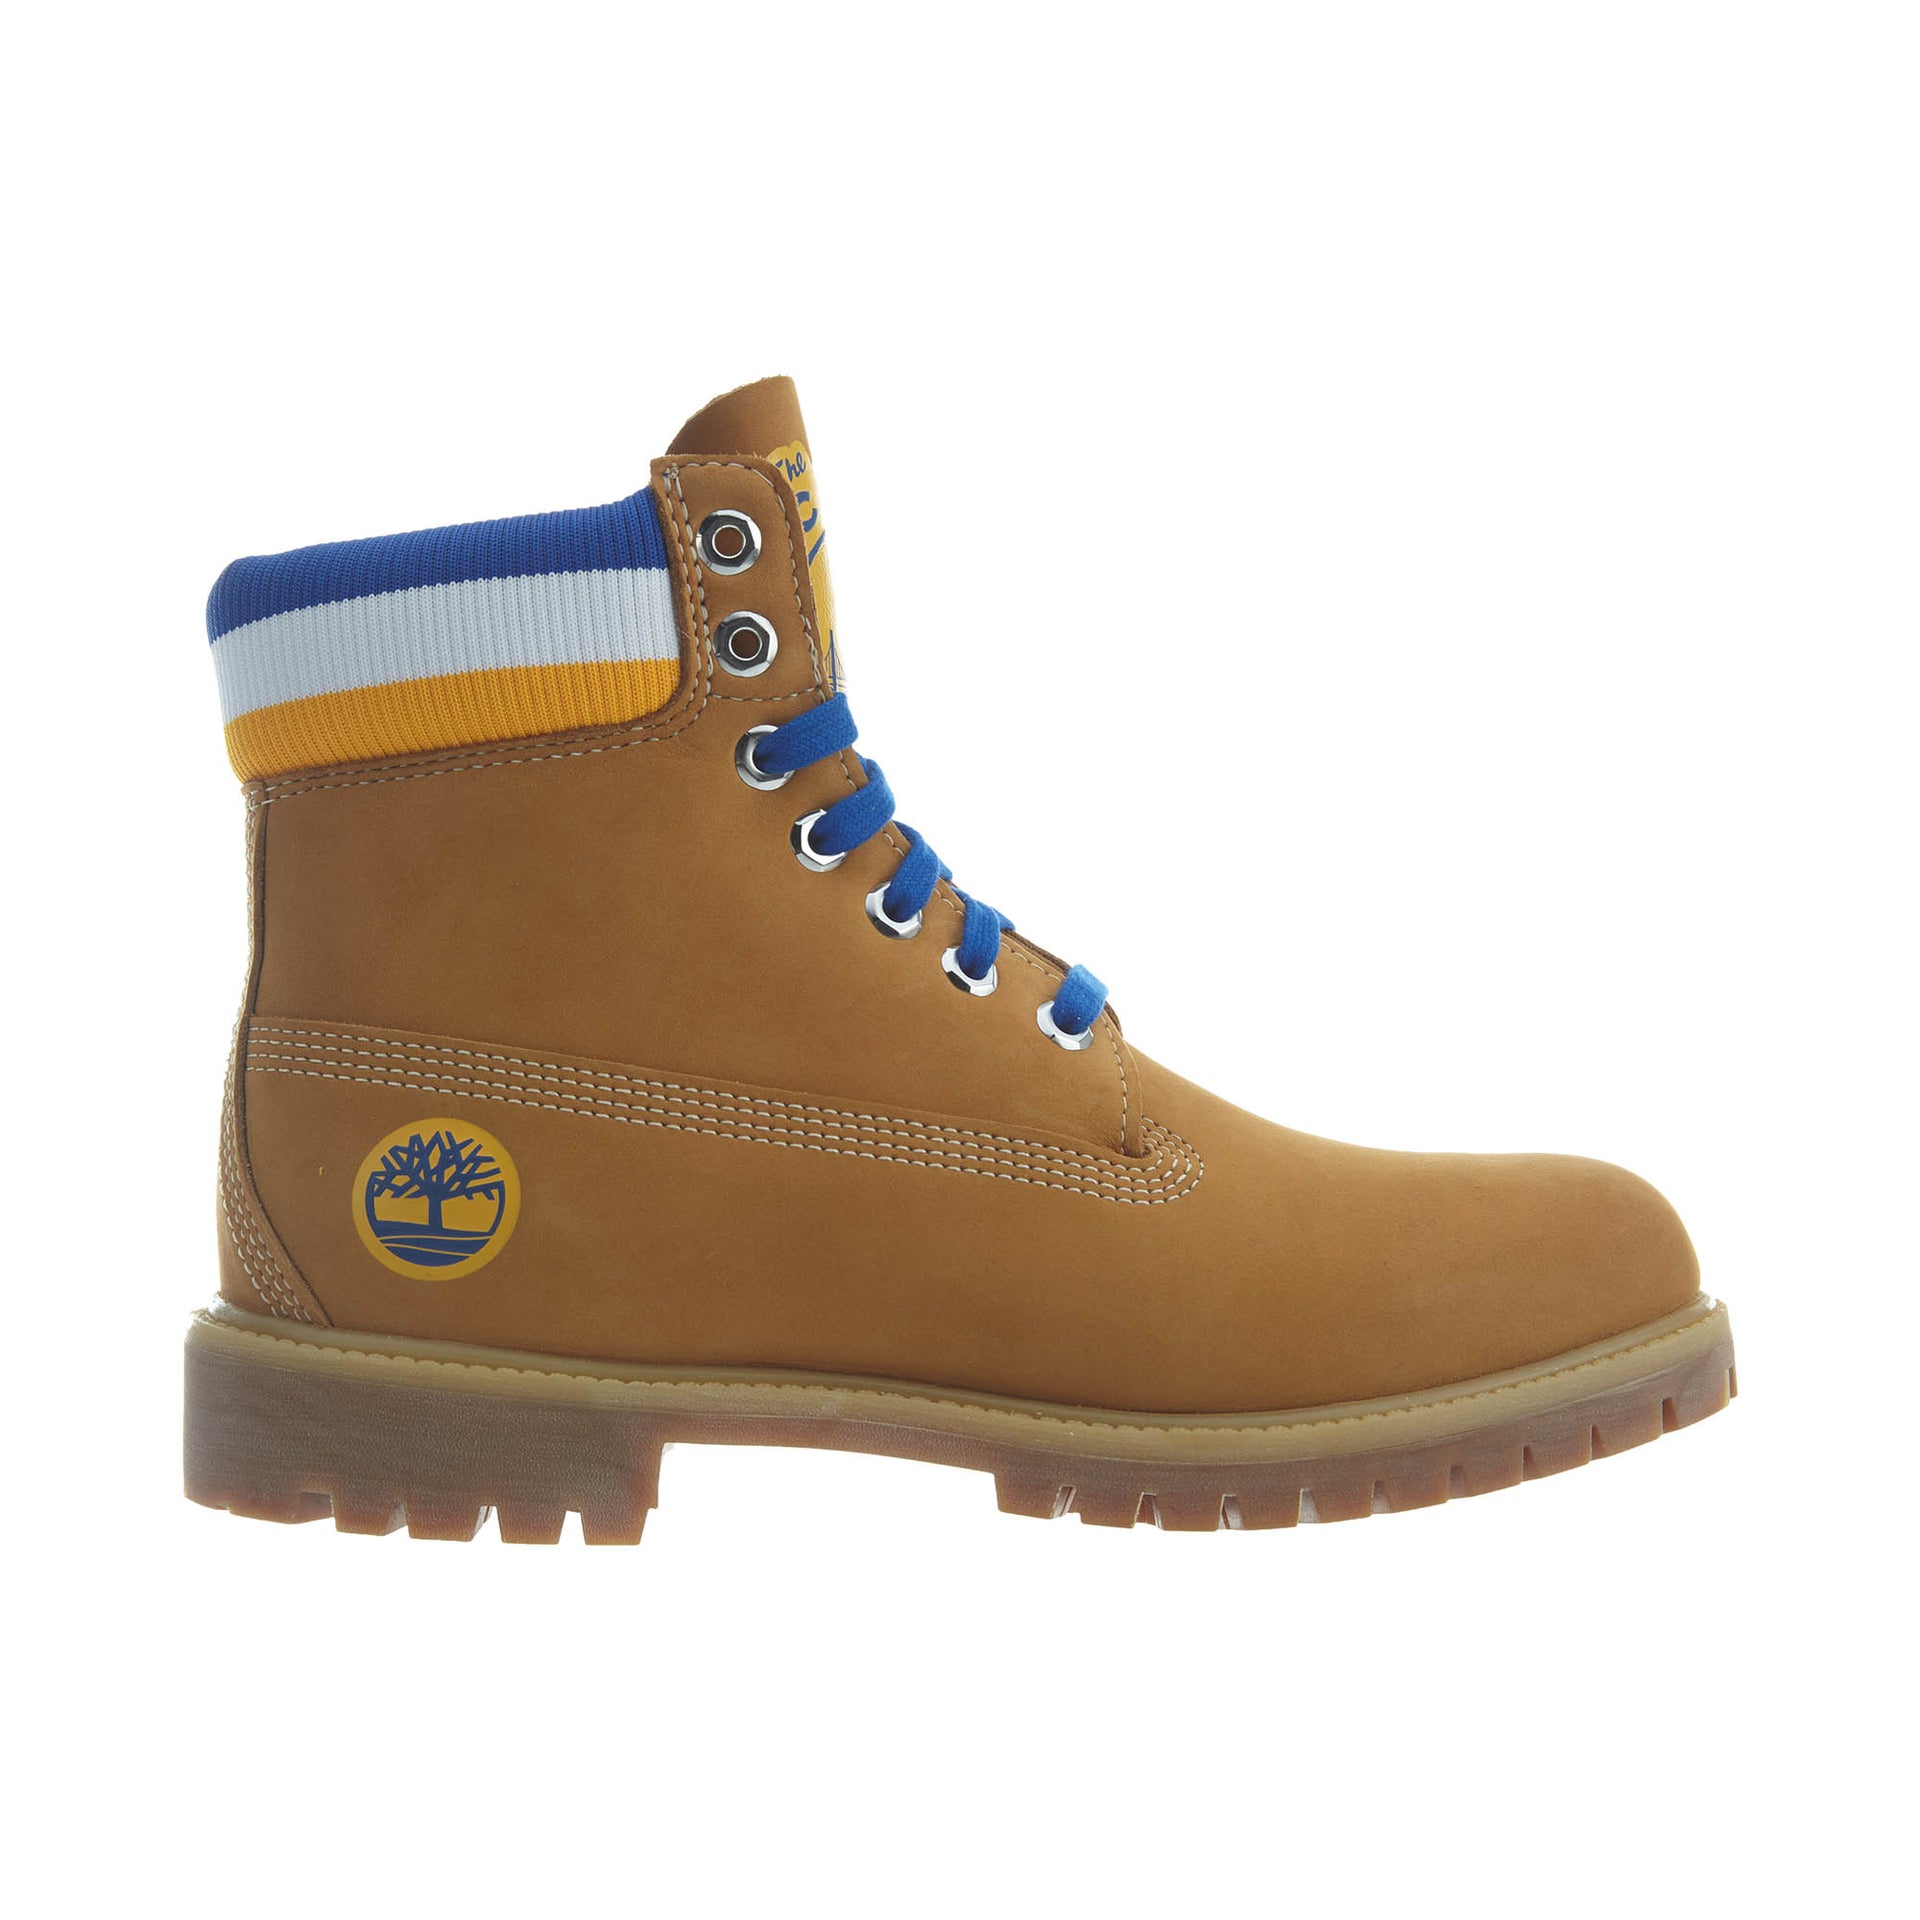 Timberland 6" Premium Boot Mens Style : Tb0a1ud5-231